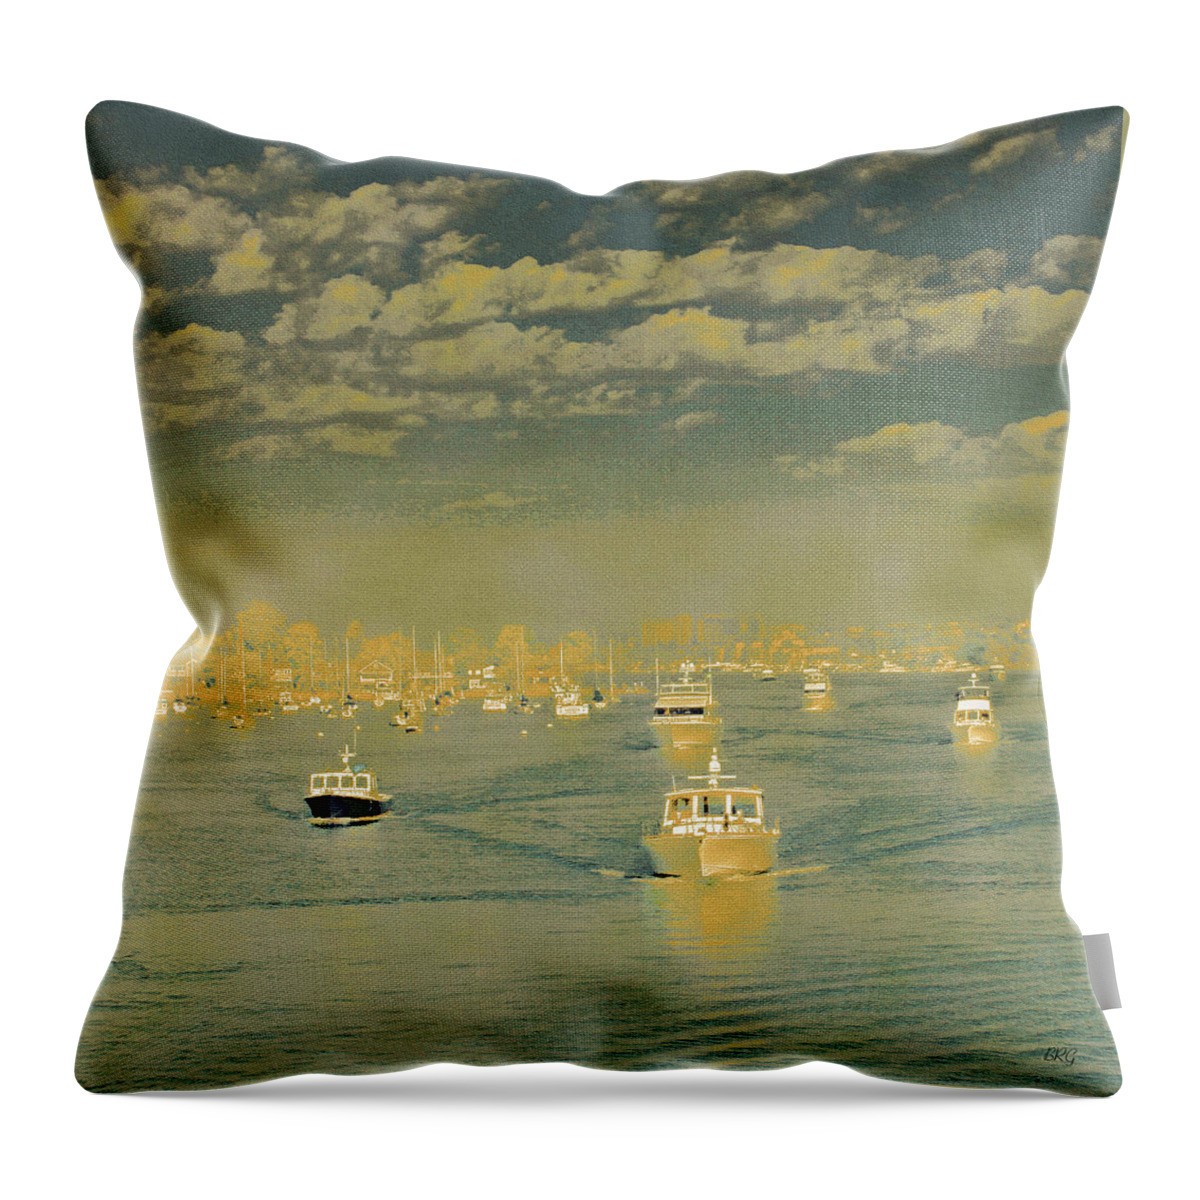 Nautical Throw Pillow featuring the photograph Seascape With Boats by Ben and Raisa Gertsberg